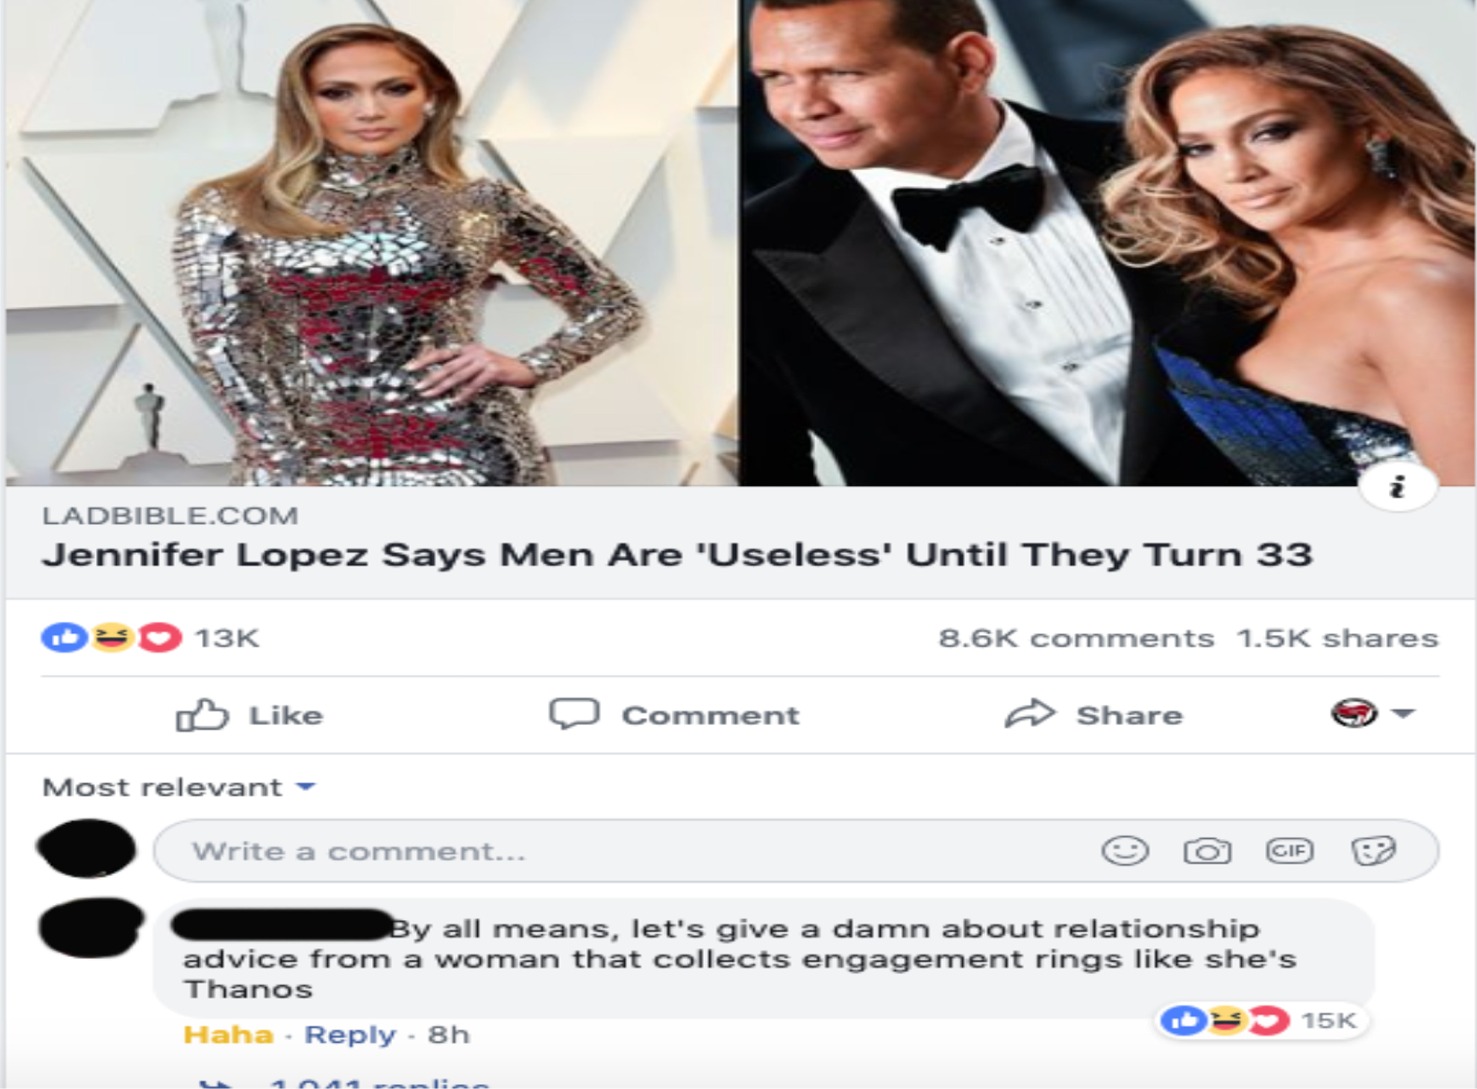 shoulder - Ladbible.Com Jennifer Lopez Says Men Are 'Useless' Until they Turn 33 13K 0 0 Comment Most relevant Write a comment... By all means, let's give a damn about relationship advice from a woman that collects engagement rings she's Thanos 15K Haha 8